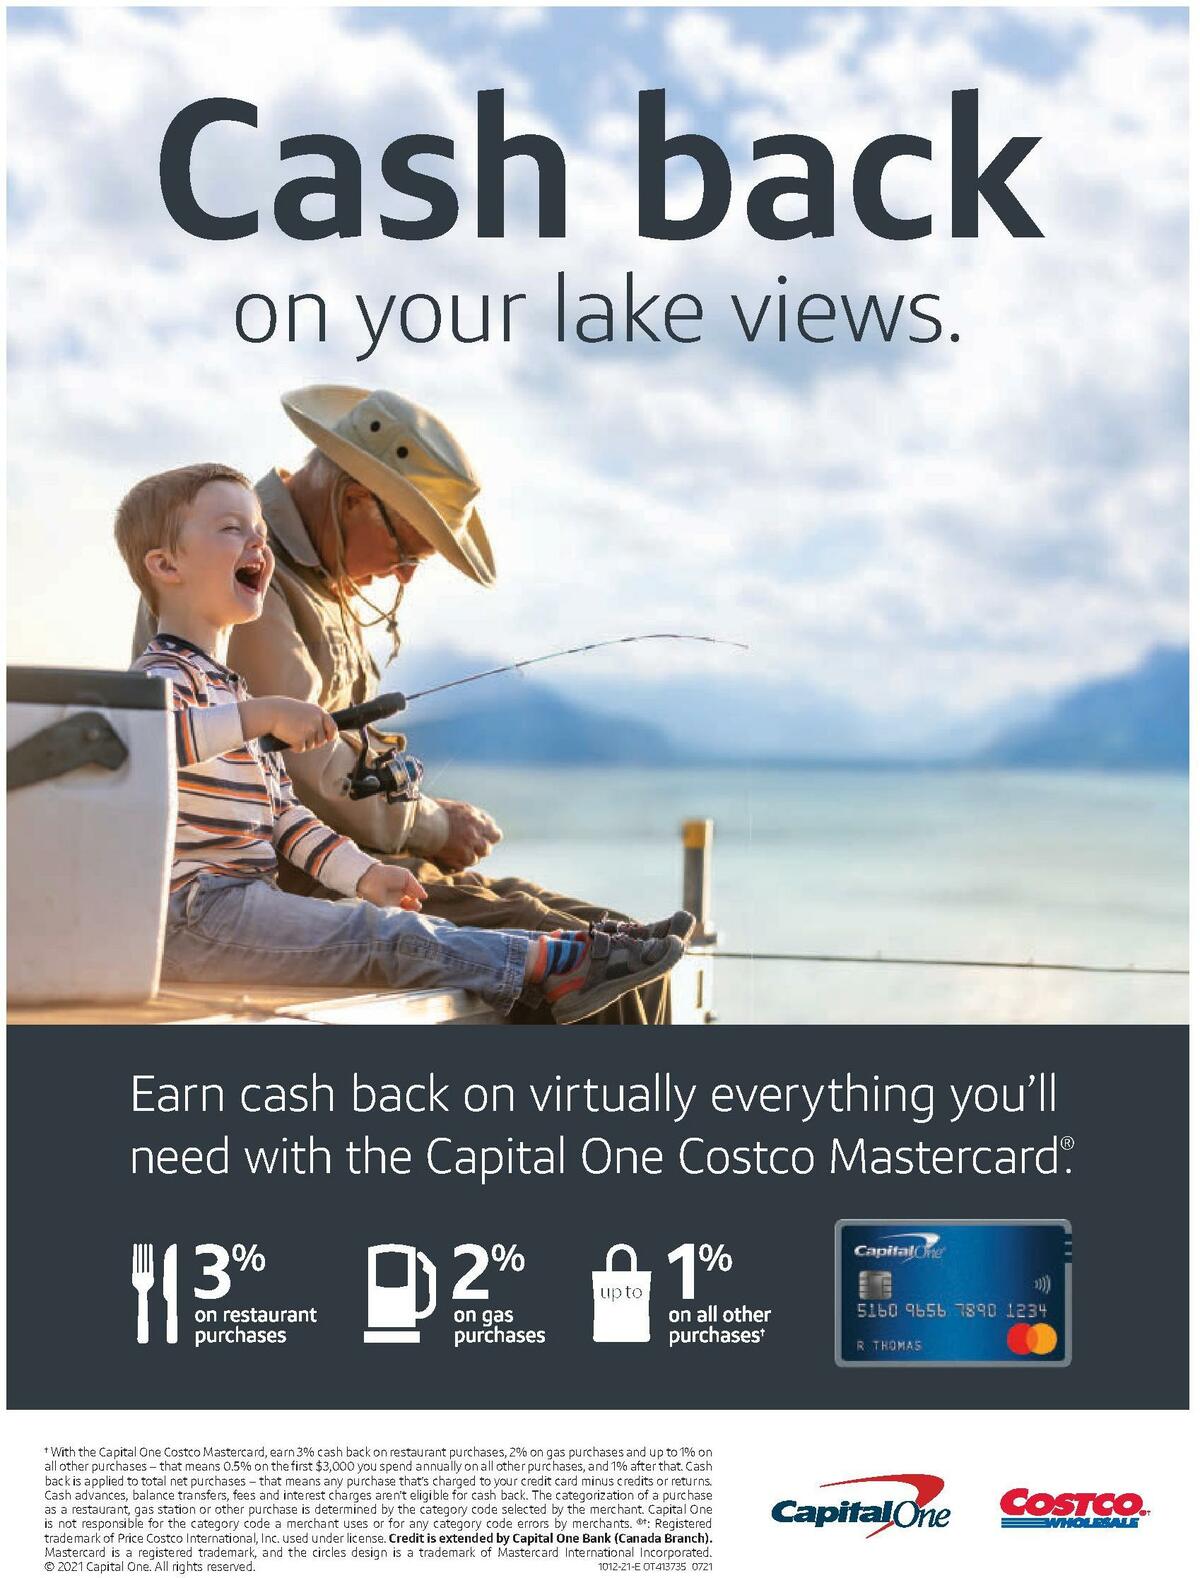 Costco Connection July Flyer from July 1